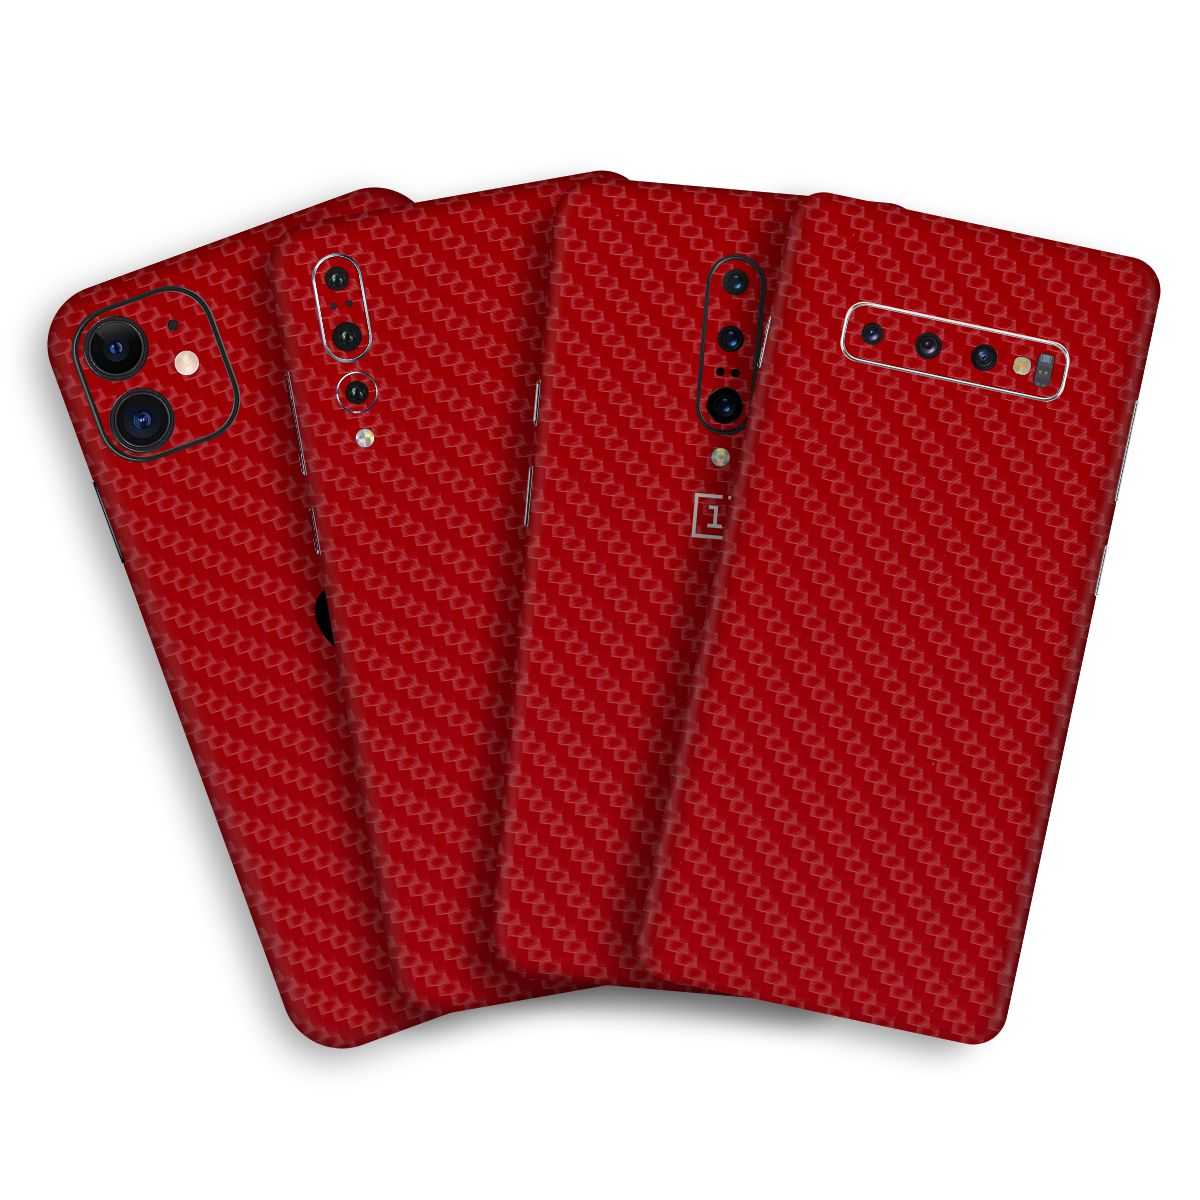 Red Carbon Mobile Skin / Mobile Wrap for Google Pixel 2 Xl